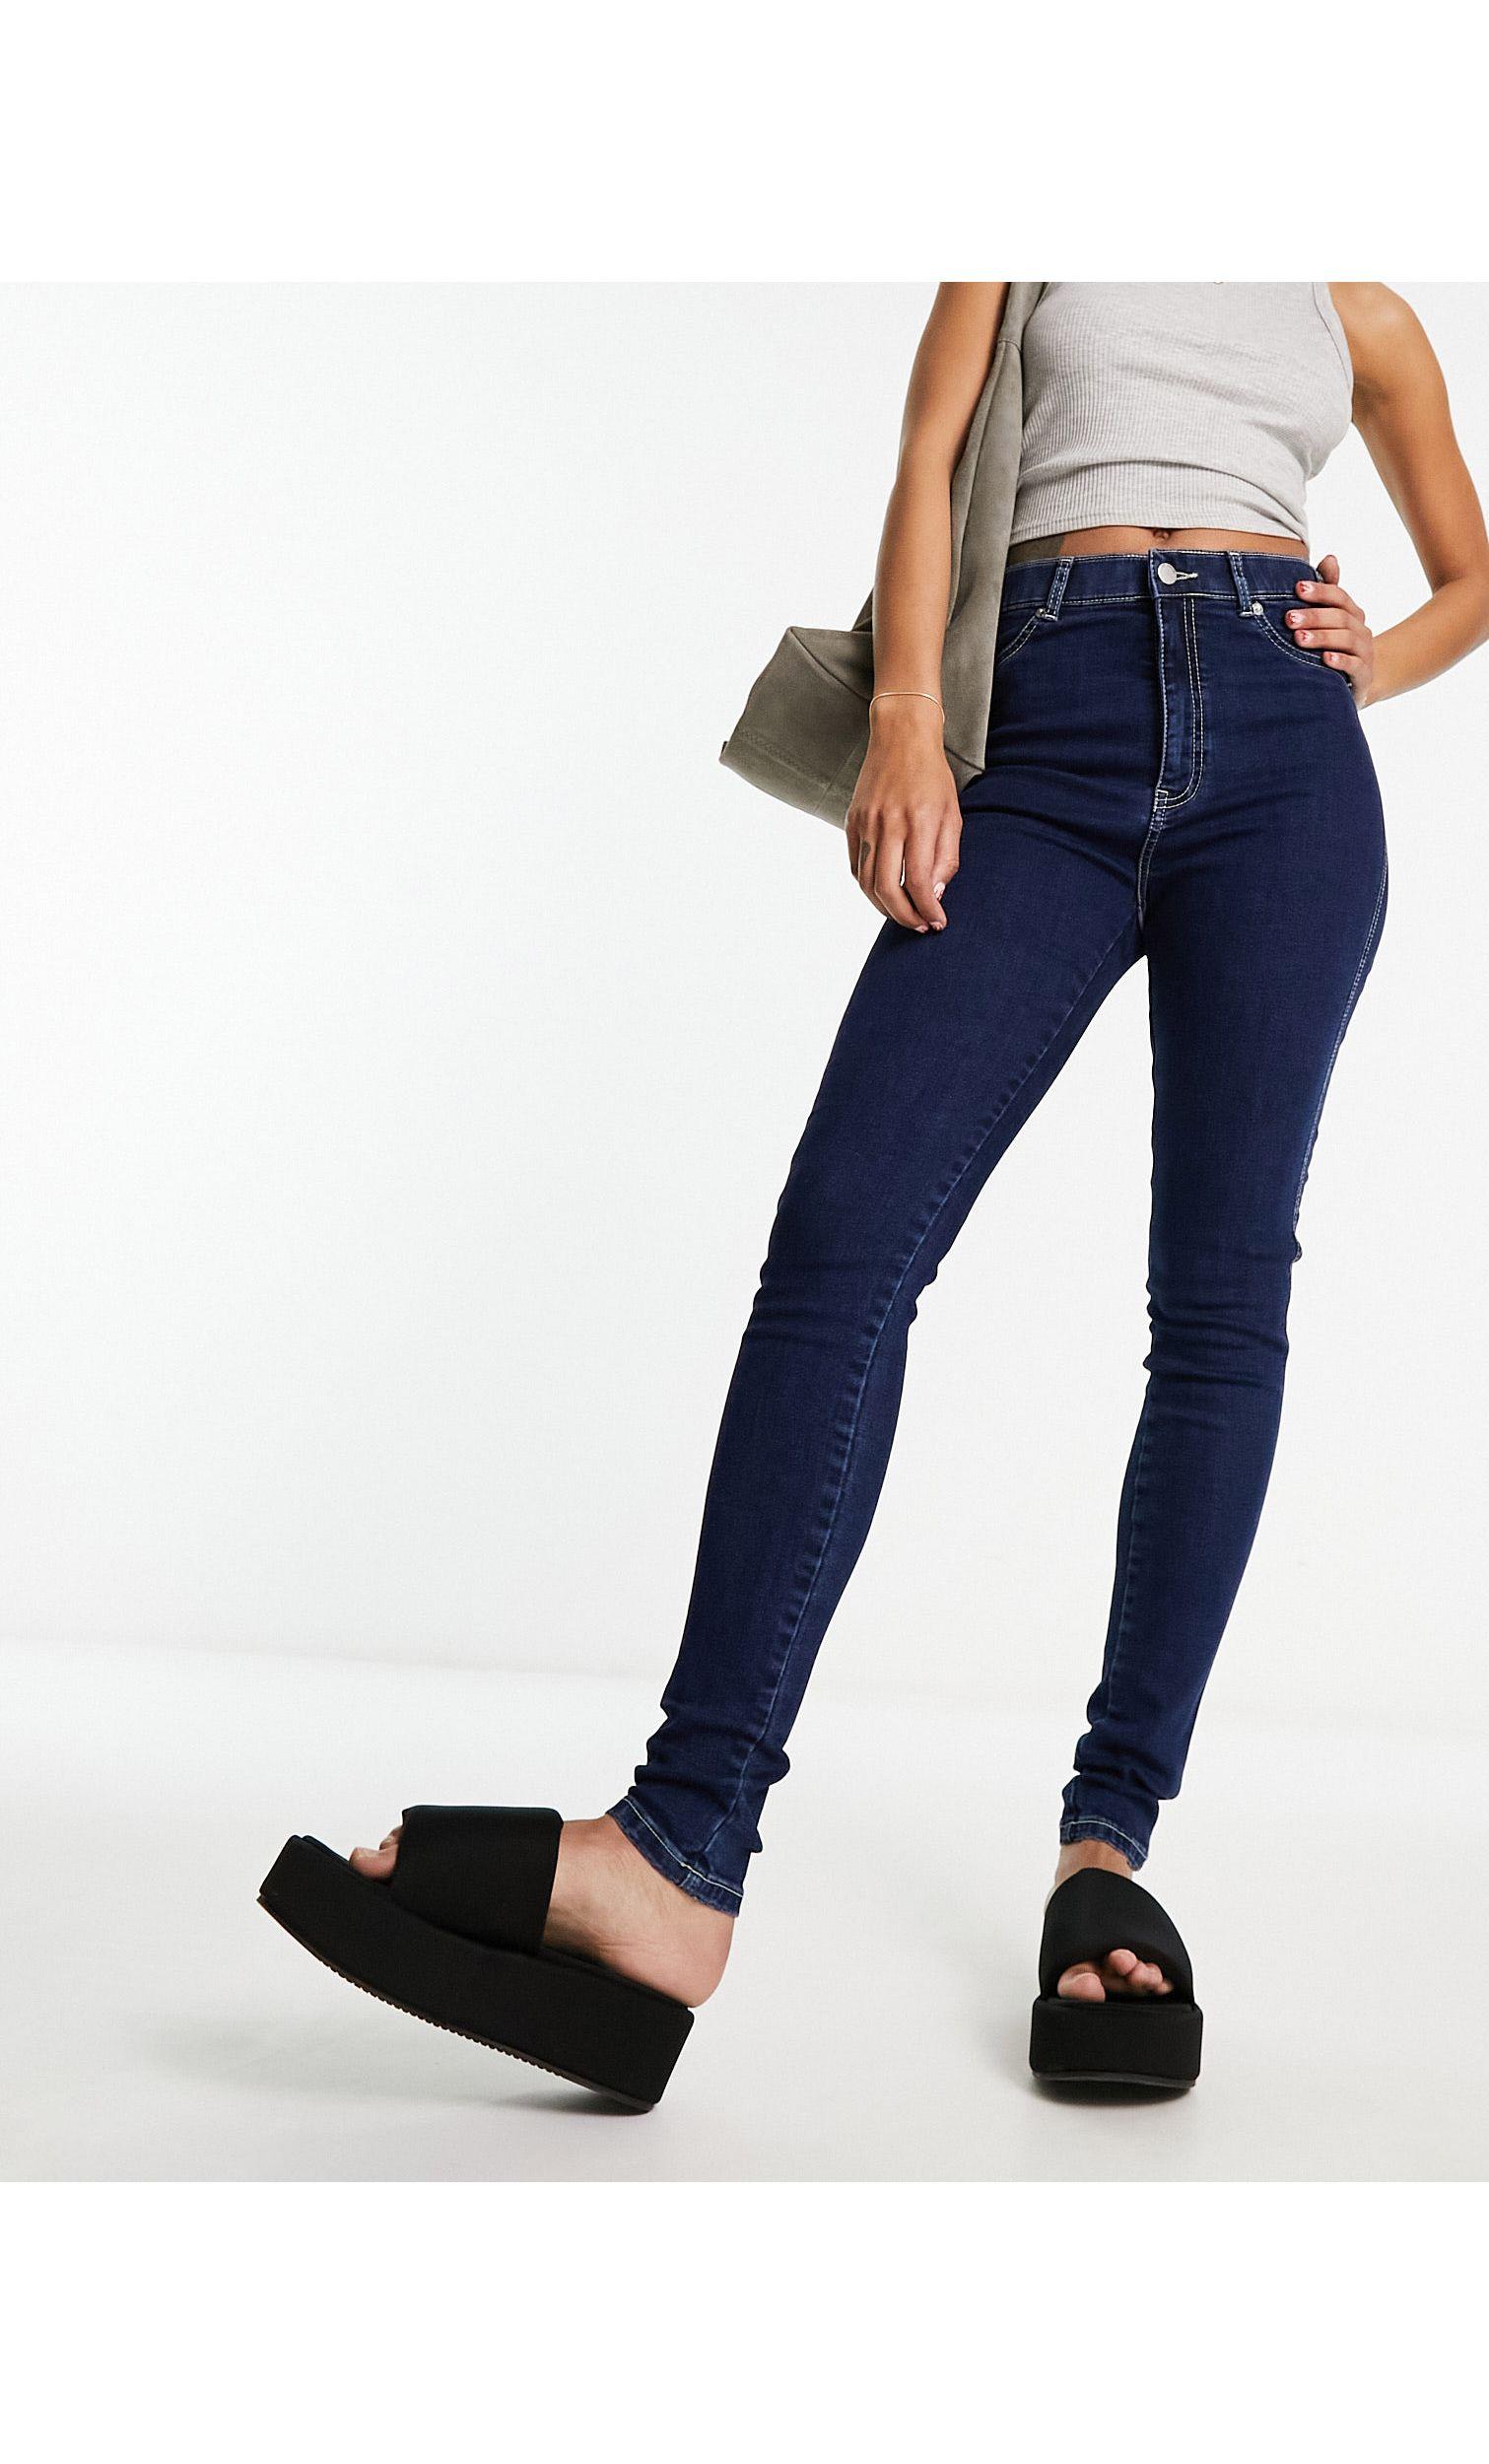 Dr. Denim Solitaire Skinny Jeans in Blue | Lyst